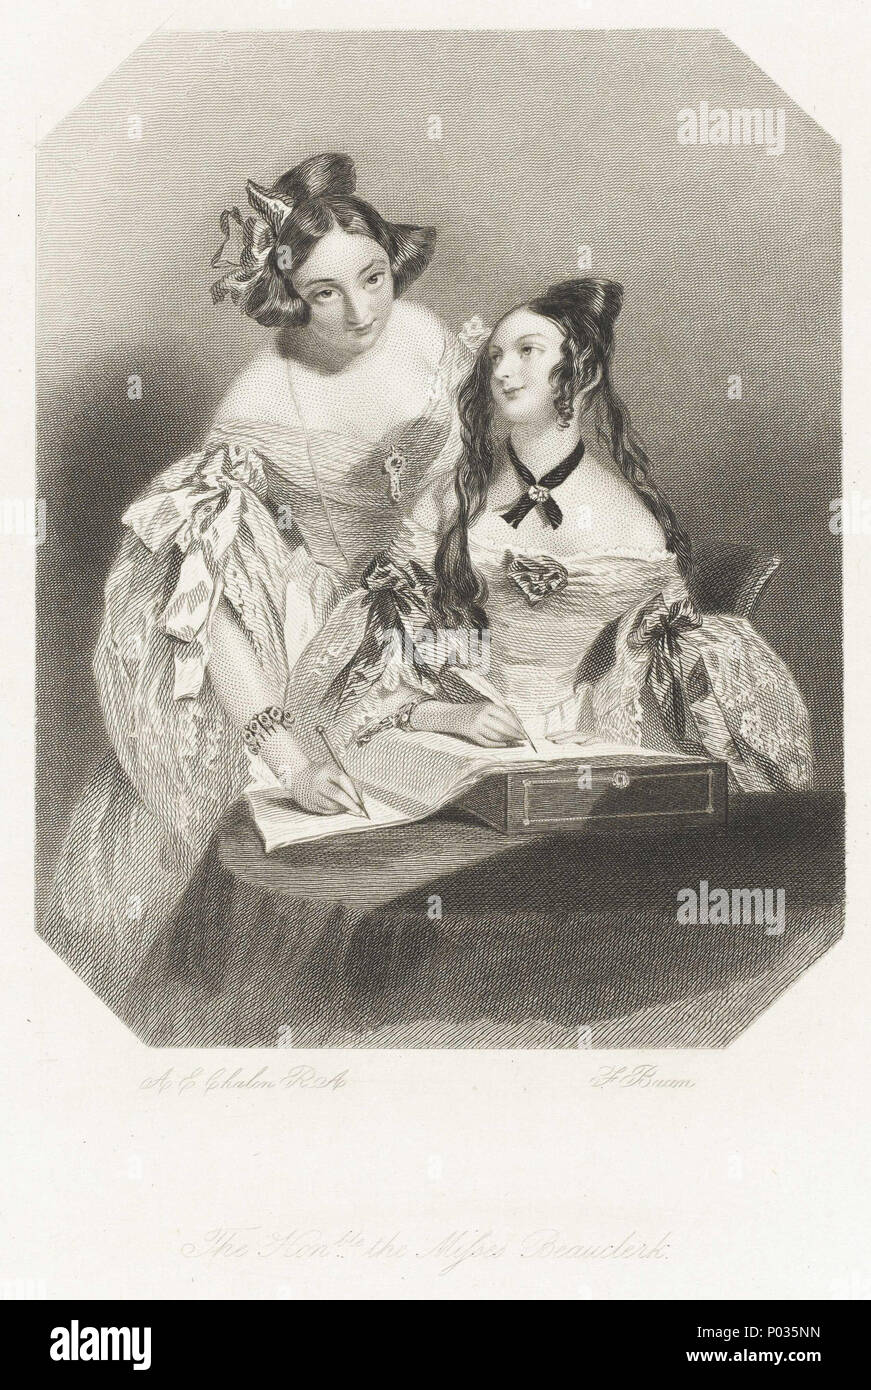 .  English: 'The Honble the Misses Beauclerk' 'The Honble the Misses Beauclerk' by Frederick Bacon after Alfred Edward Chalon. This print may relate to a story of the same name. Two young women wearing off the shoulder ball gowns write in a large book. One looks directly at the artist, she stands a little behind the other who is sitting gazing up at her friend. This print is published by the firm Smith, Elder & Co. The brother of Margaret Brodie Herschel (nee Stewart), Peter Stewart worked for Smith, Elder & Co as a printer. 'The Honble the Misses Beauclerk'  . circa 1850. Alfred Edward Chalon Stock Photo